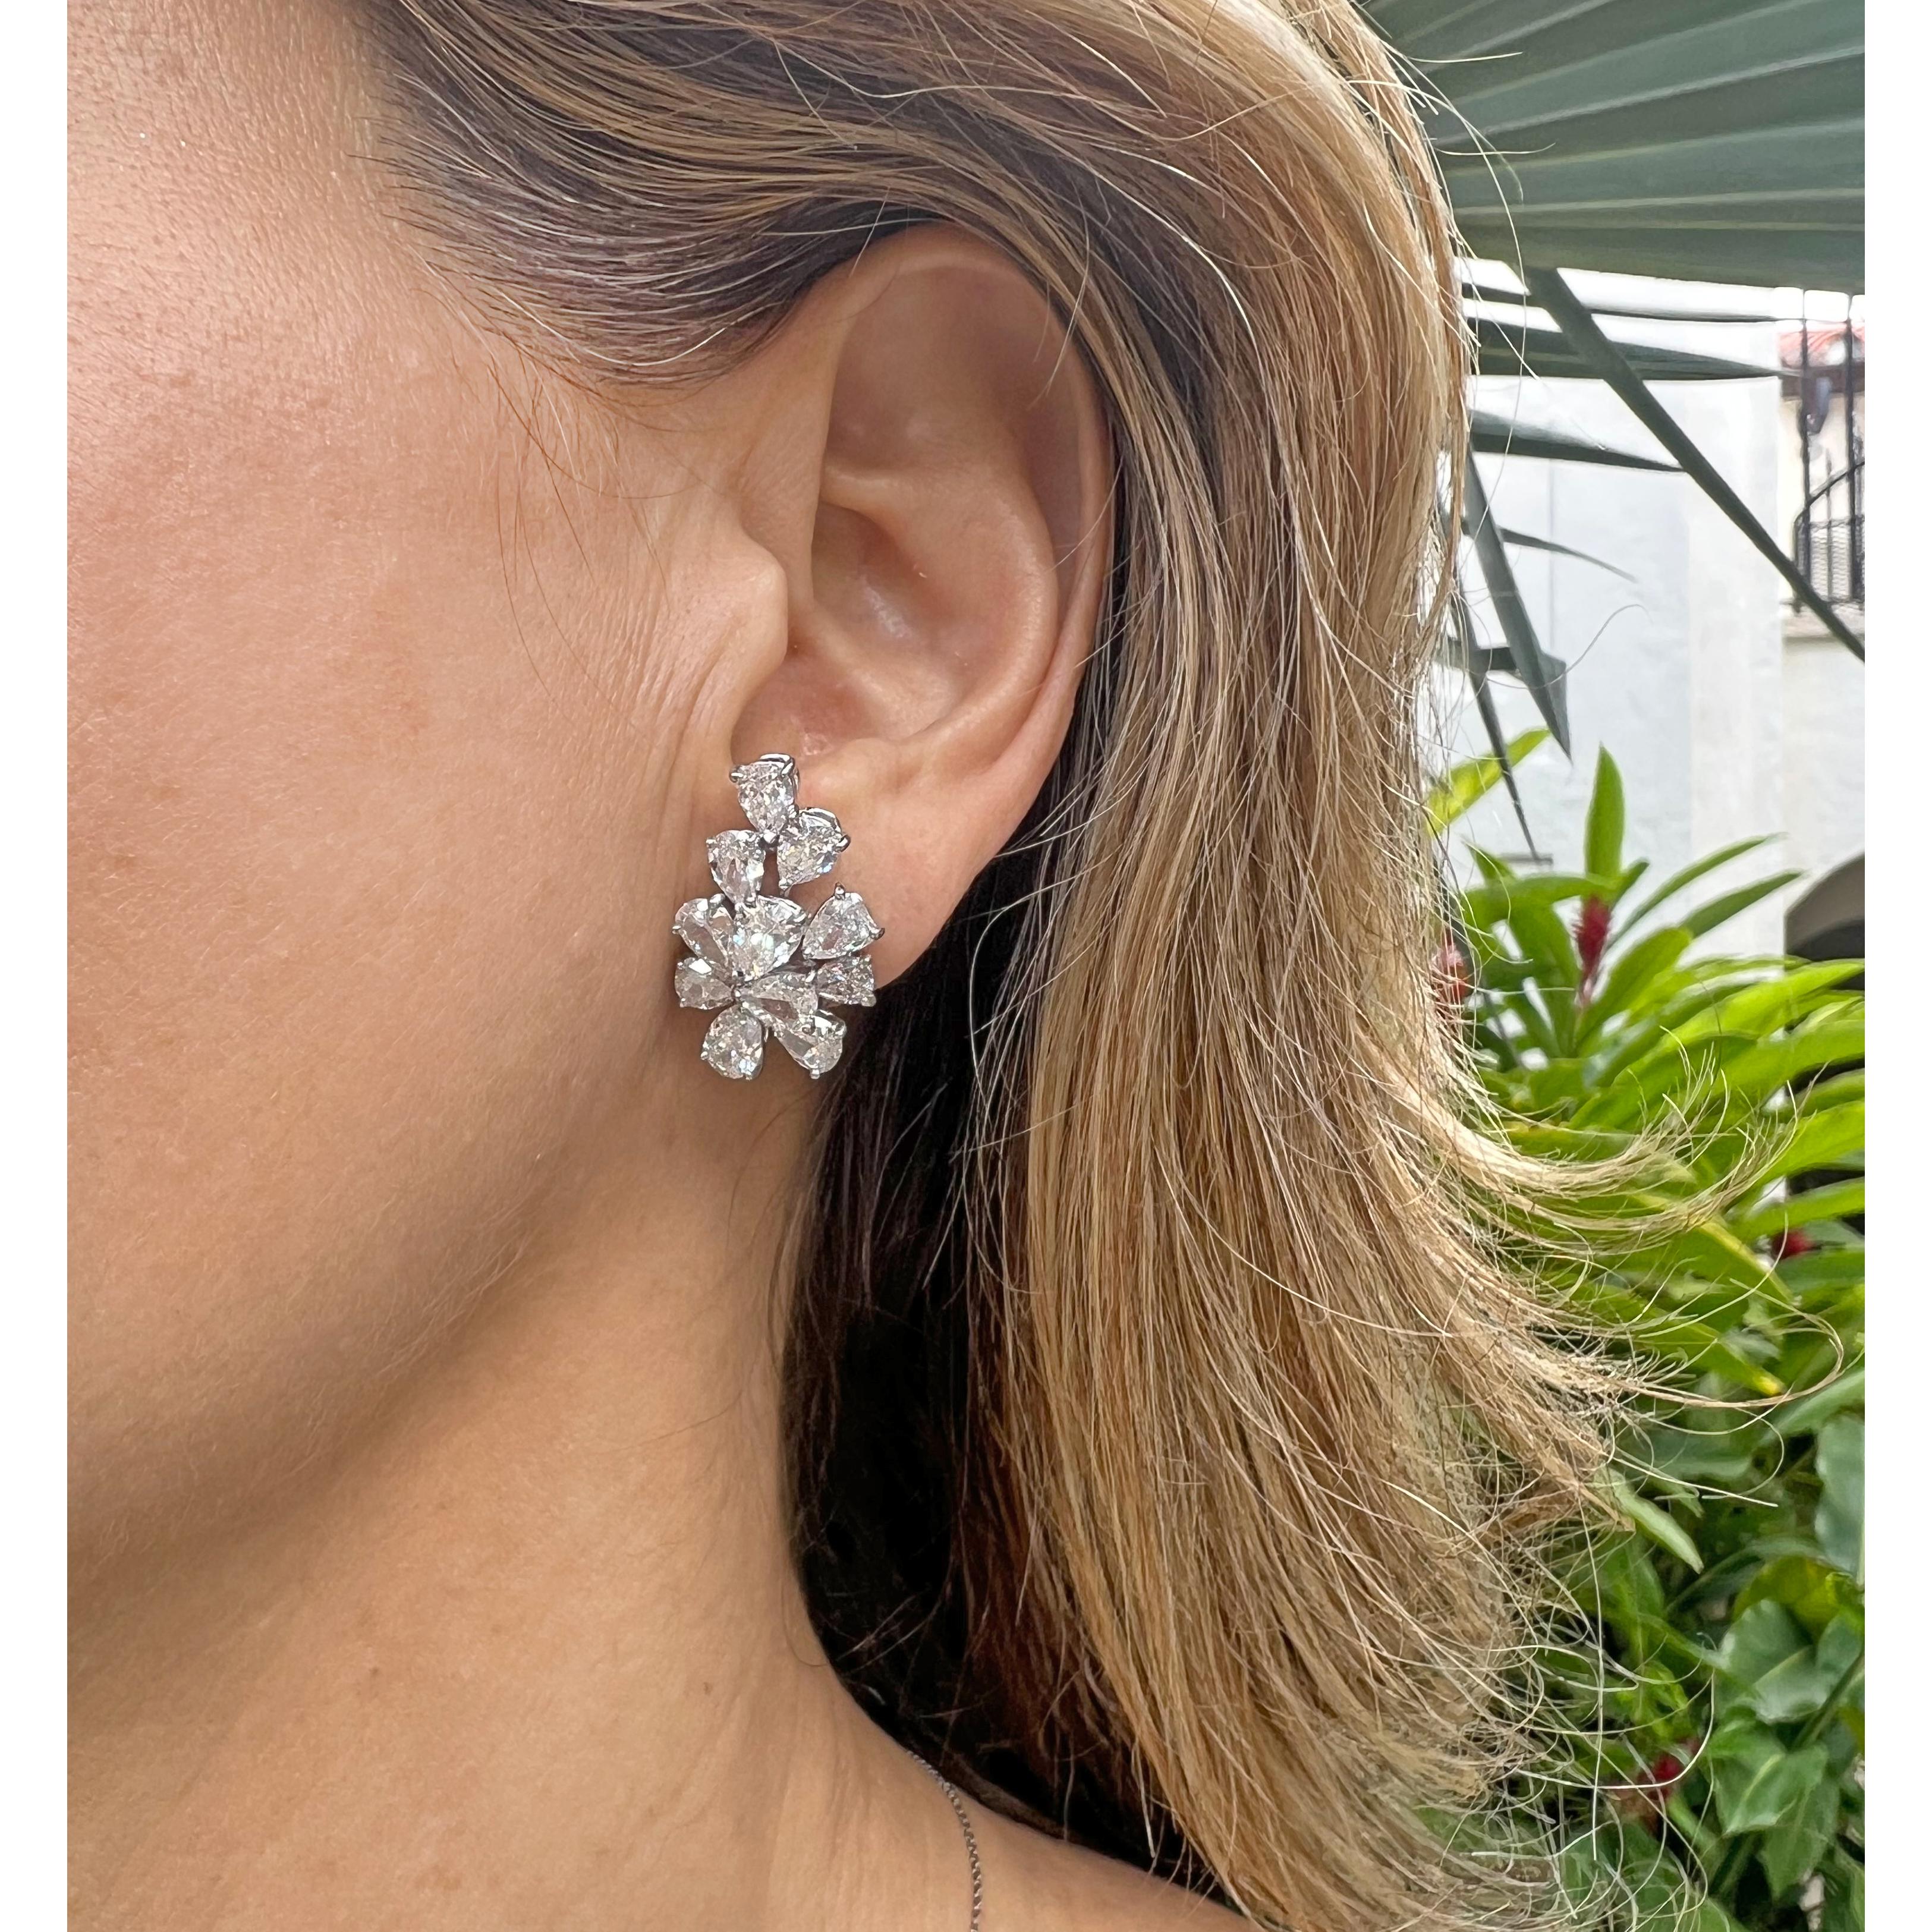 Diamond cluster earclips, each featuring eleven near-colorless pear brilliant-cut diamonds prong-set in platinum. Twenty-two diamonds weighing approximately 9.72 total carats (H-J color, SI1-I1 clarity). 18k white gold omega-style clip backs (posts